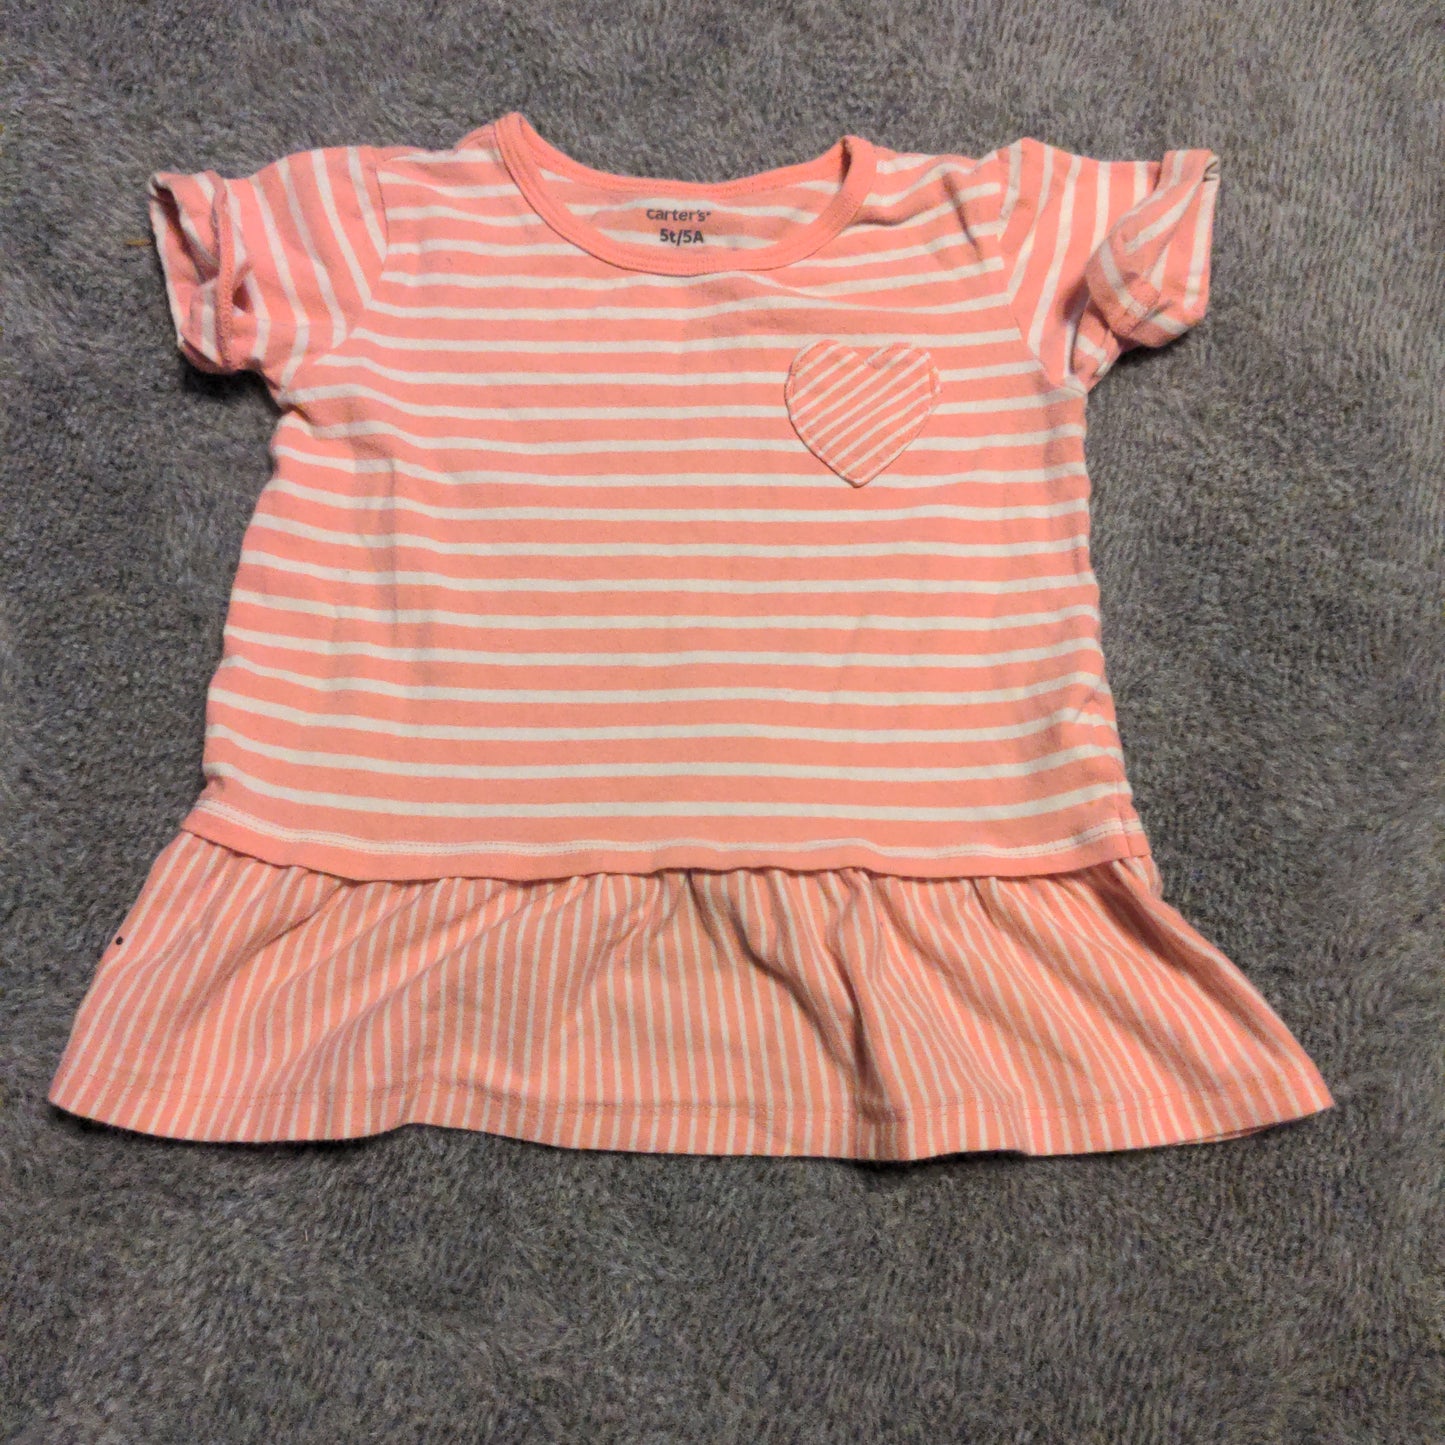 Carter's light pink/white striped shirt size 5t